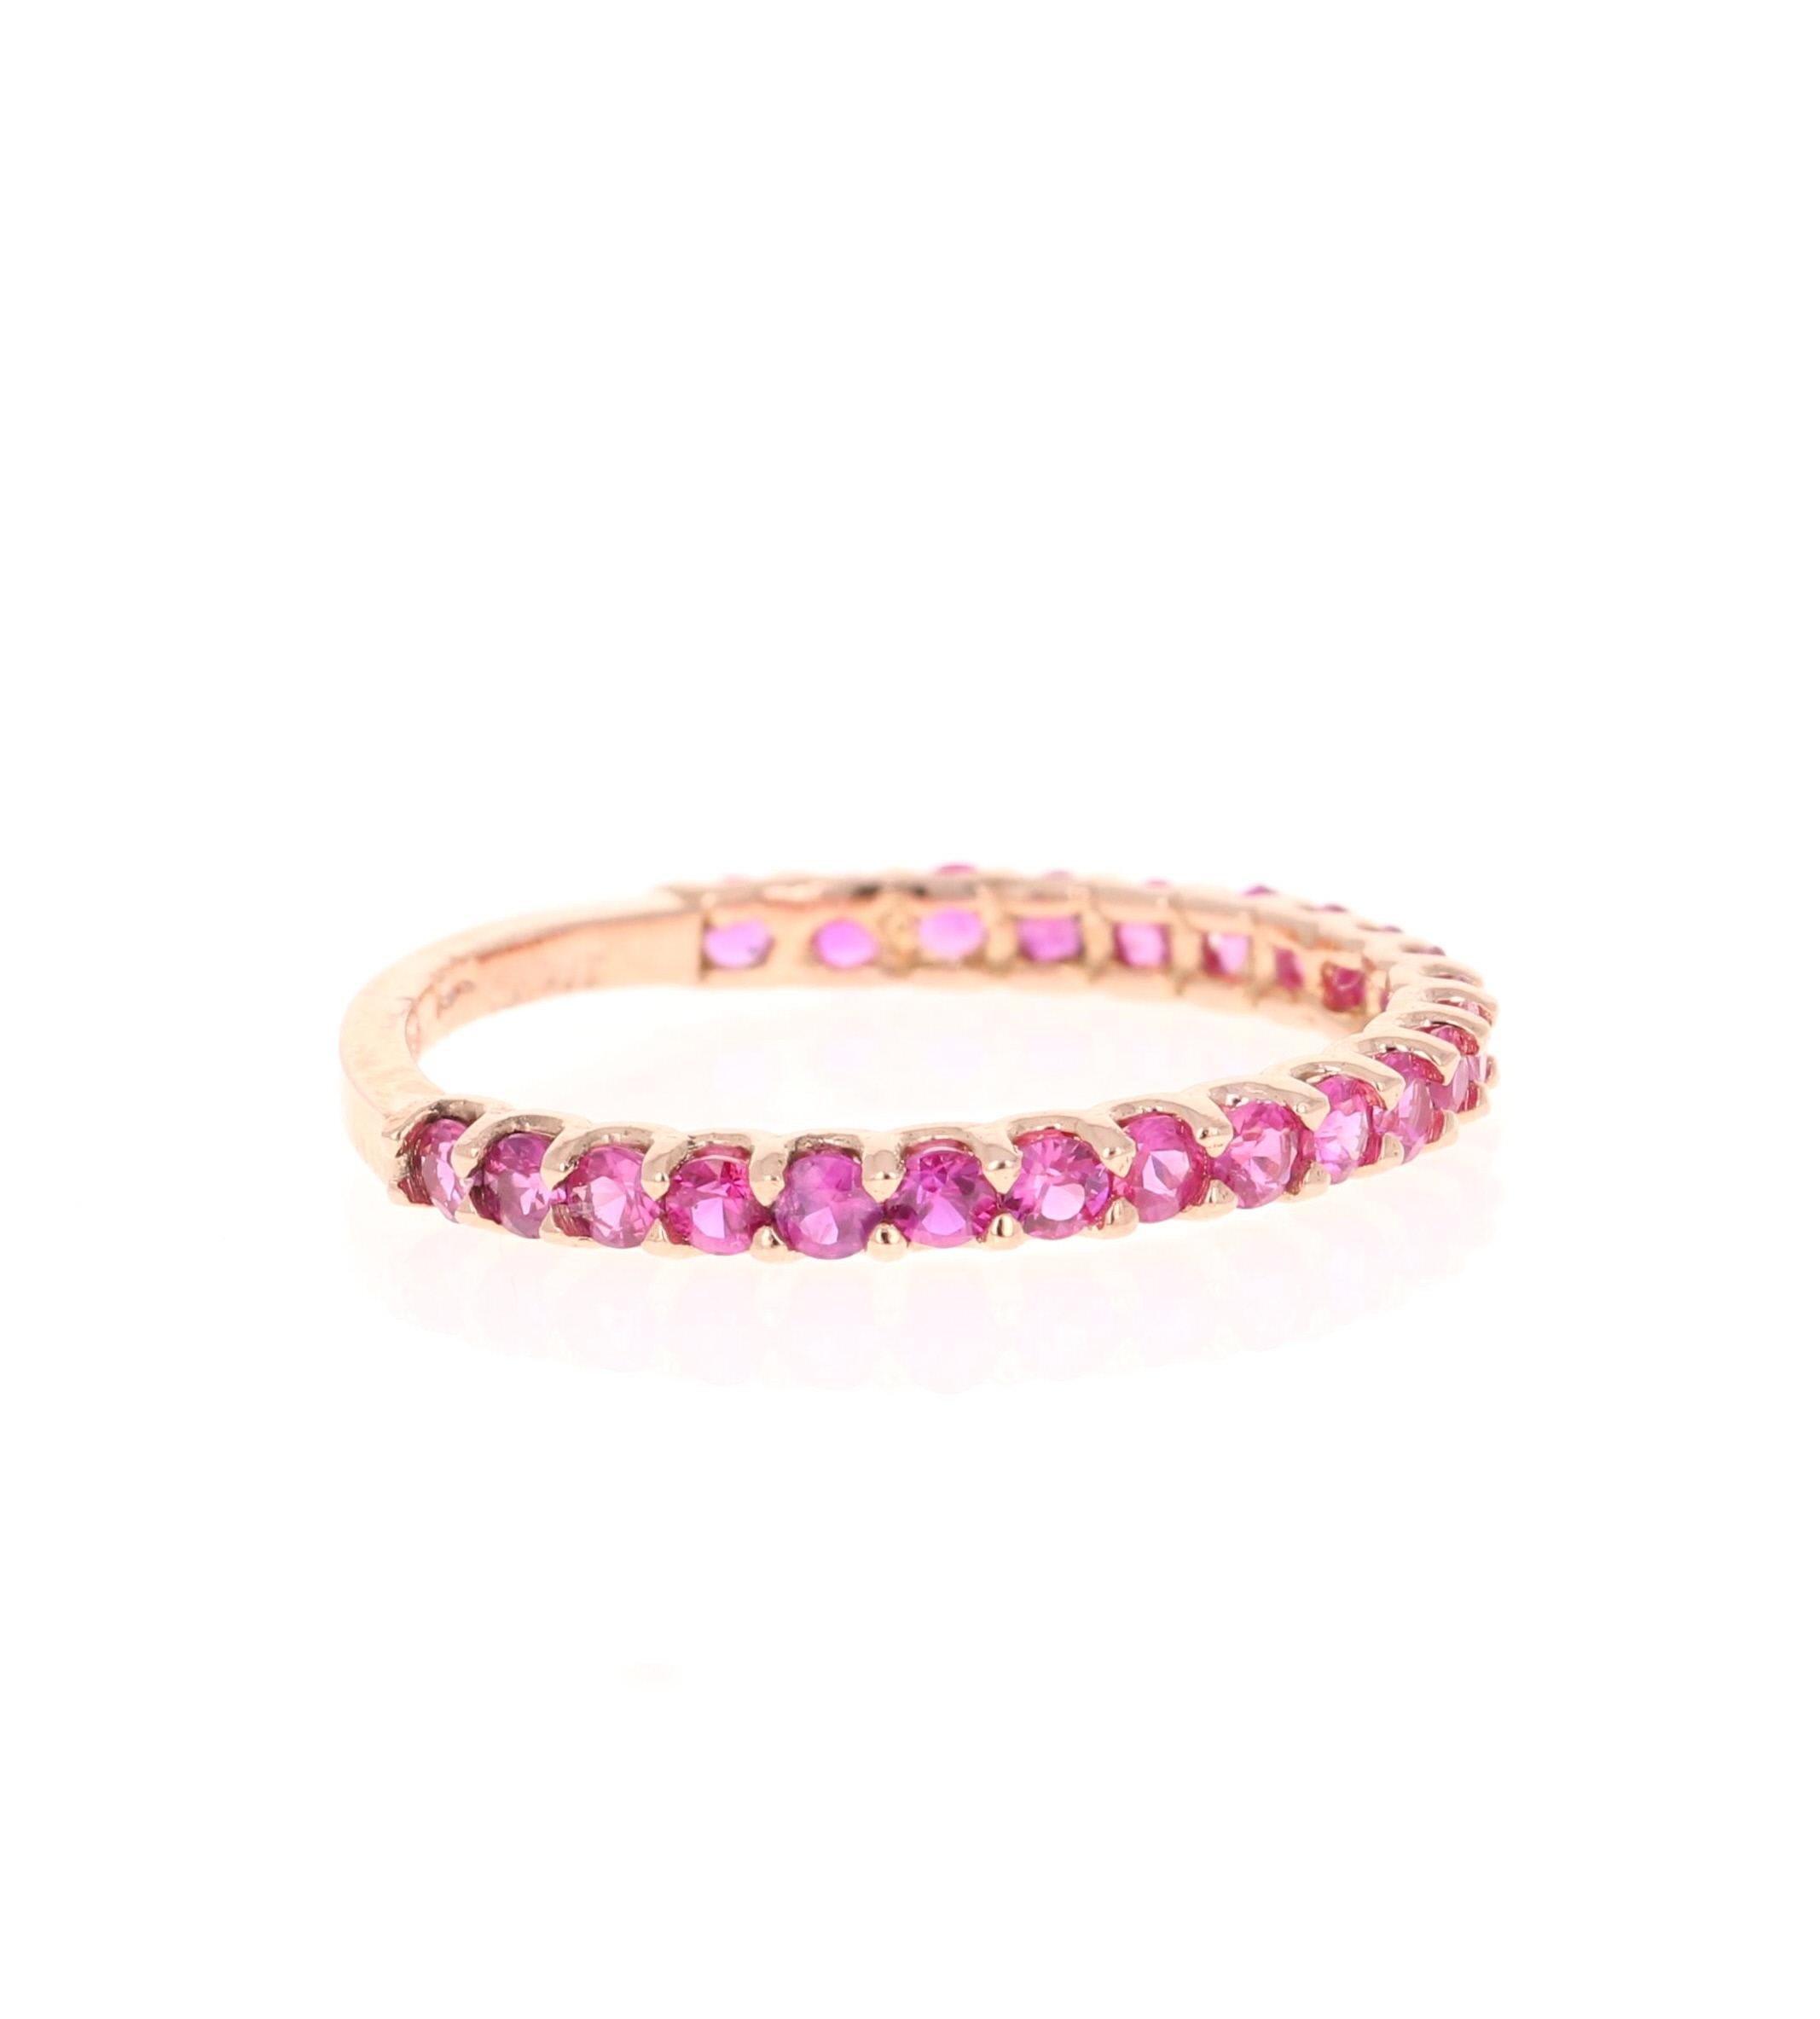 This ring has 23 Natural Round Cut Dark Pink Sapphires that weigh 0.87 Carats. 

Crafted in 14 Karat Rose Gold and weighs approximately 1.3 grams 

The ring is a size 7 and can be re-sized at no additional charge!

We have this same ring available